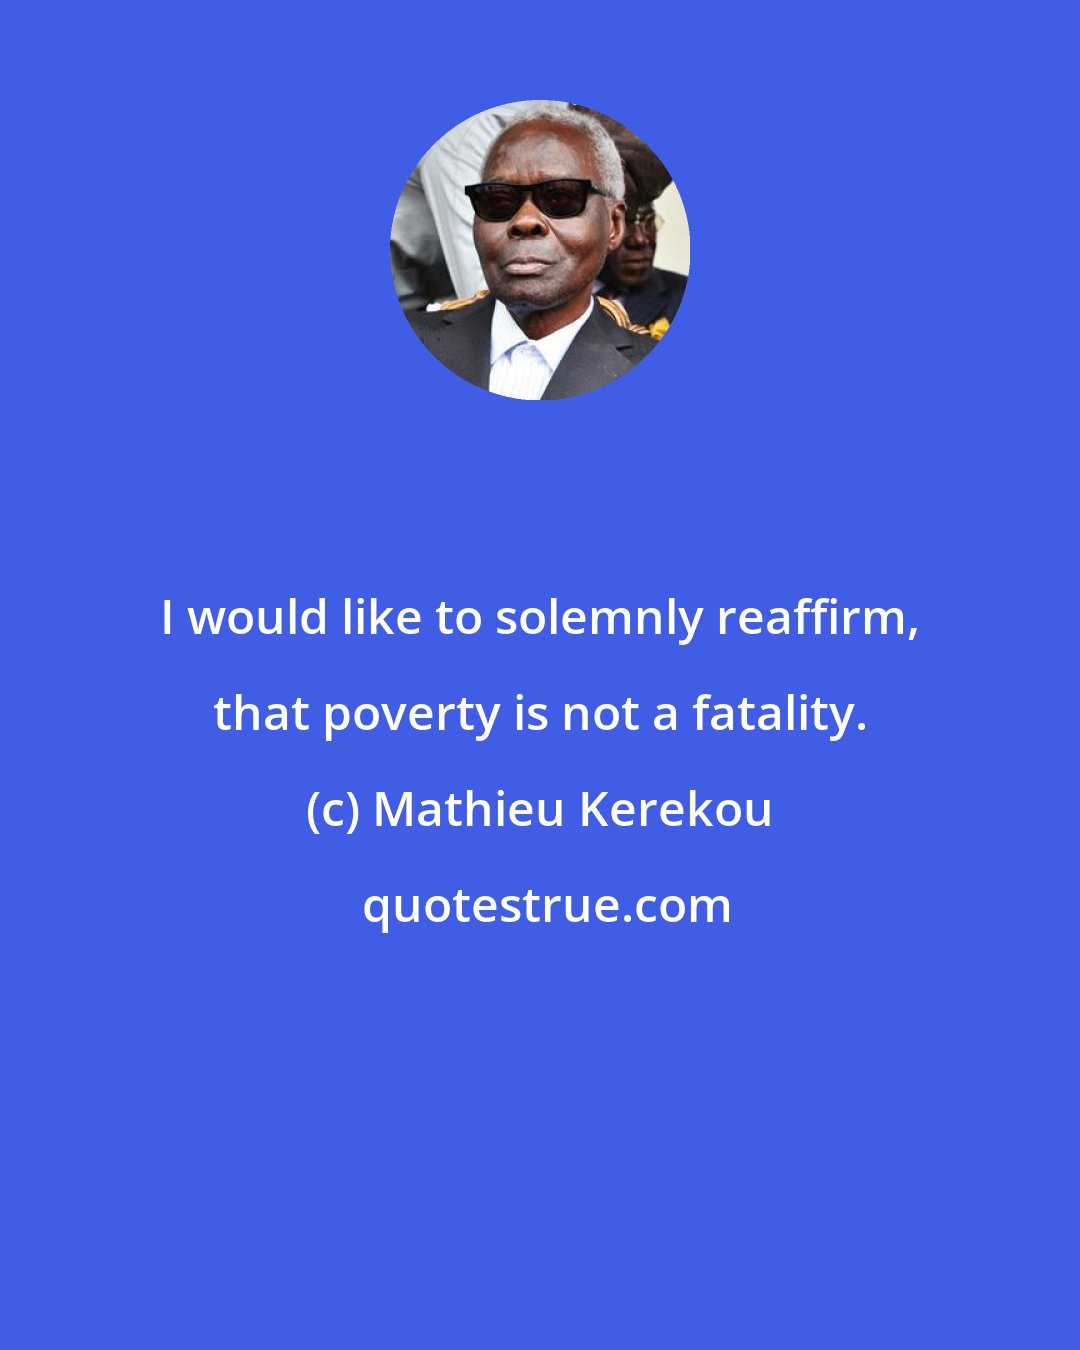 Mathieu Kerekou: I would like to solemnly reaffirm, that poverty is not a fatality.